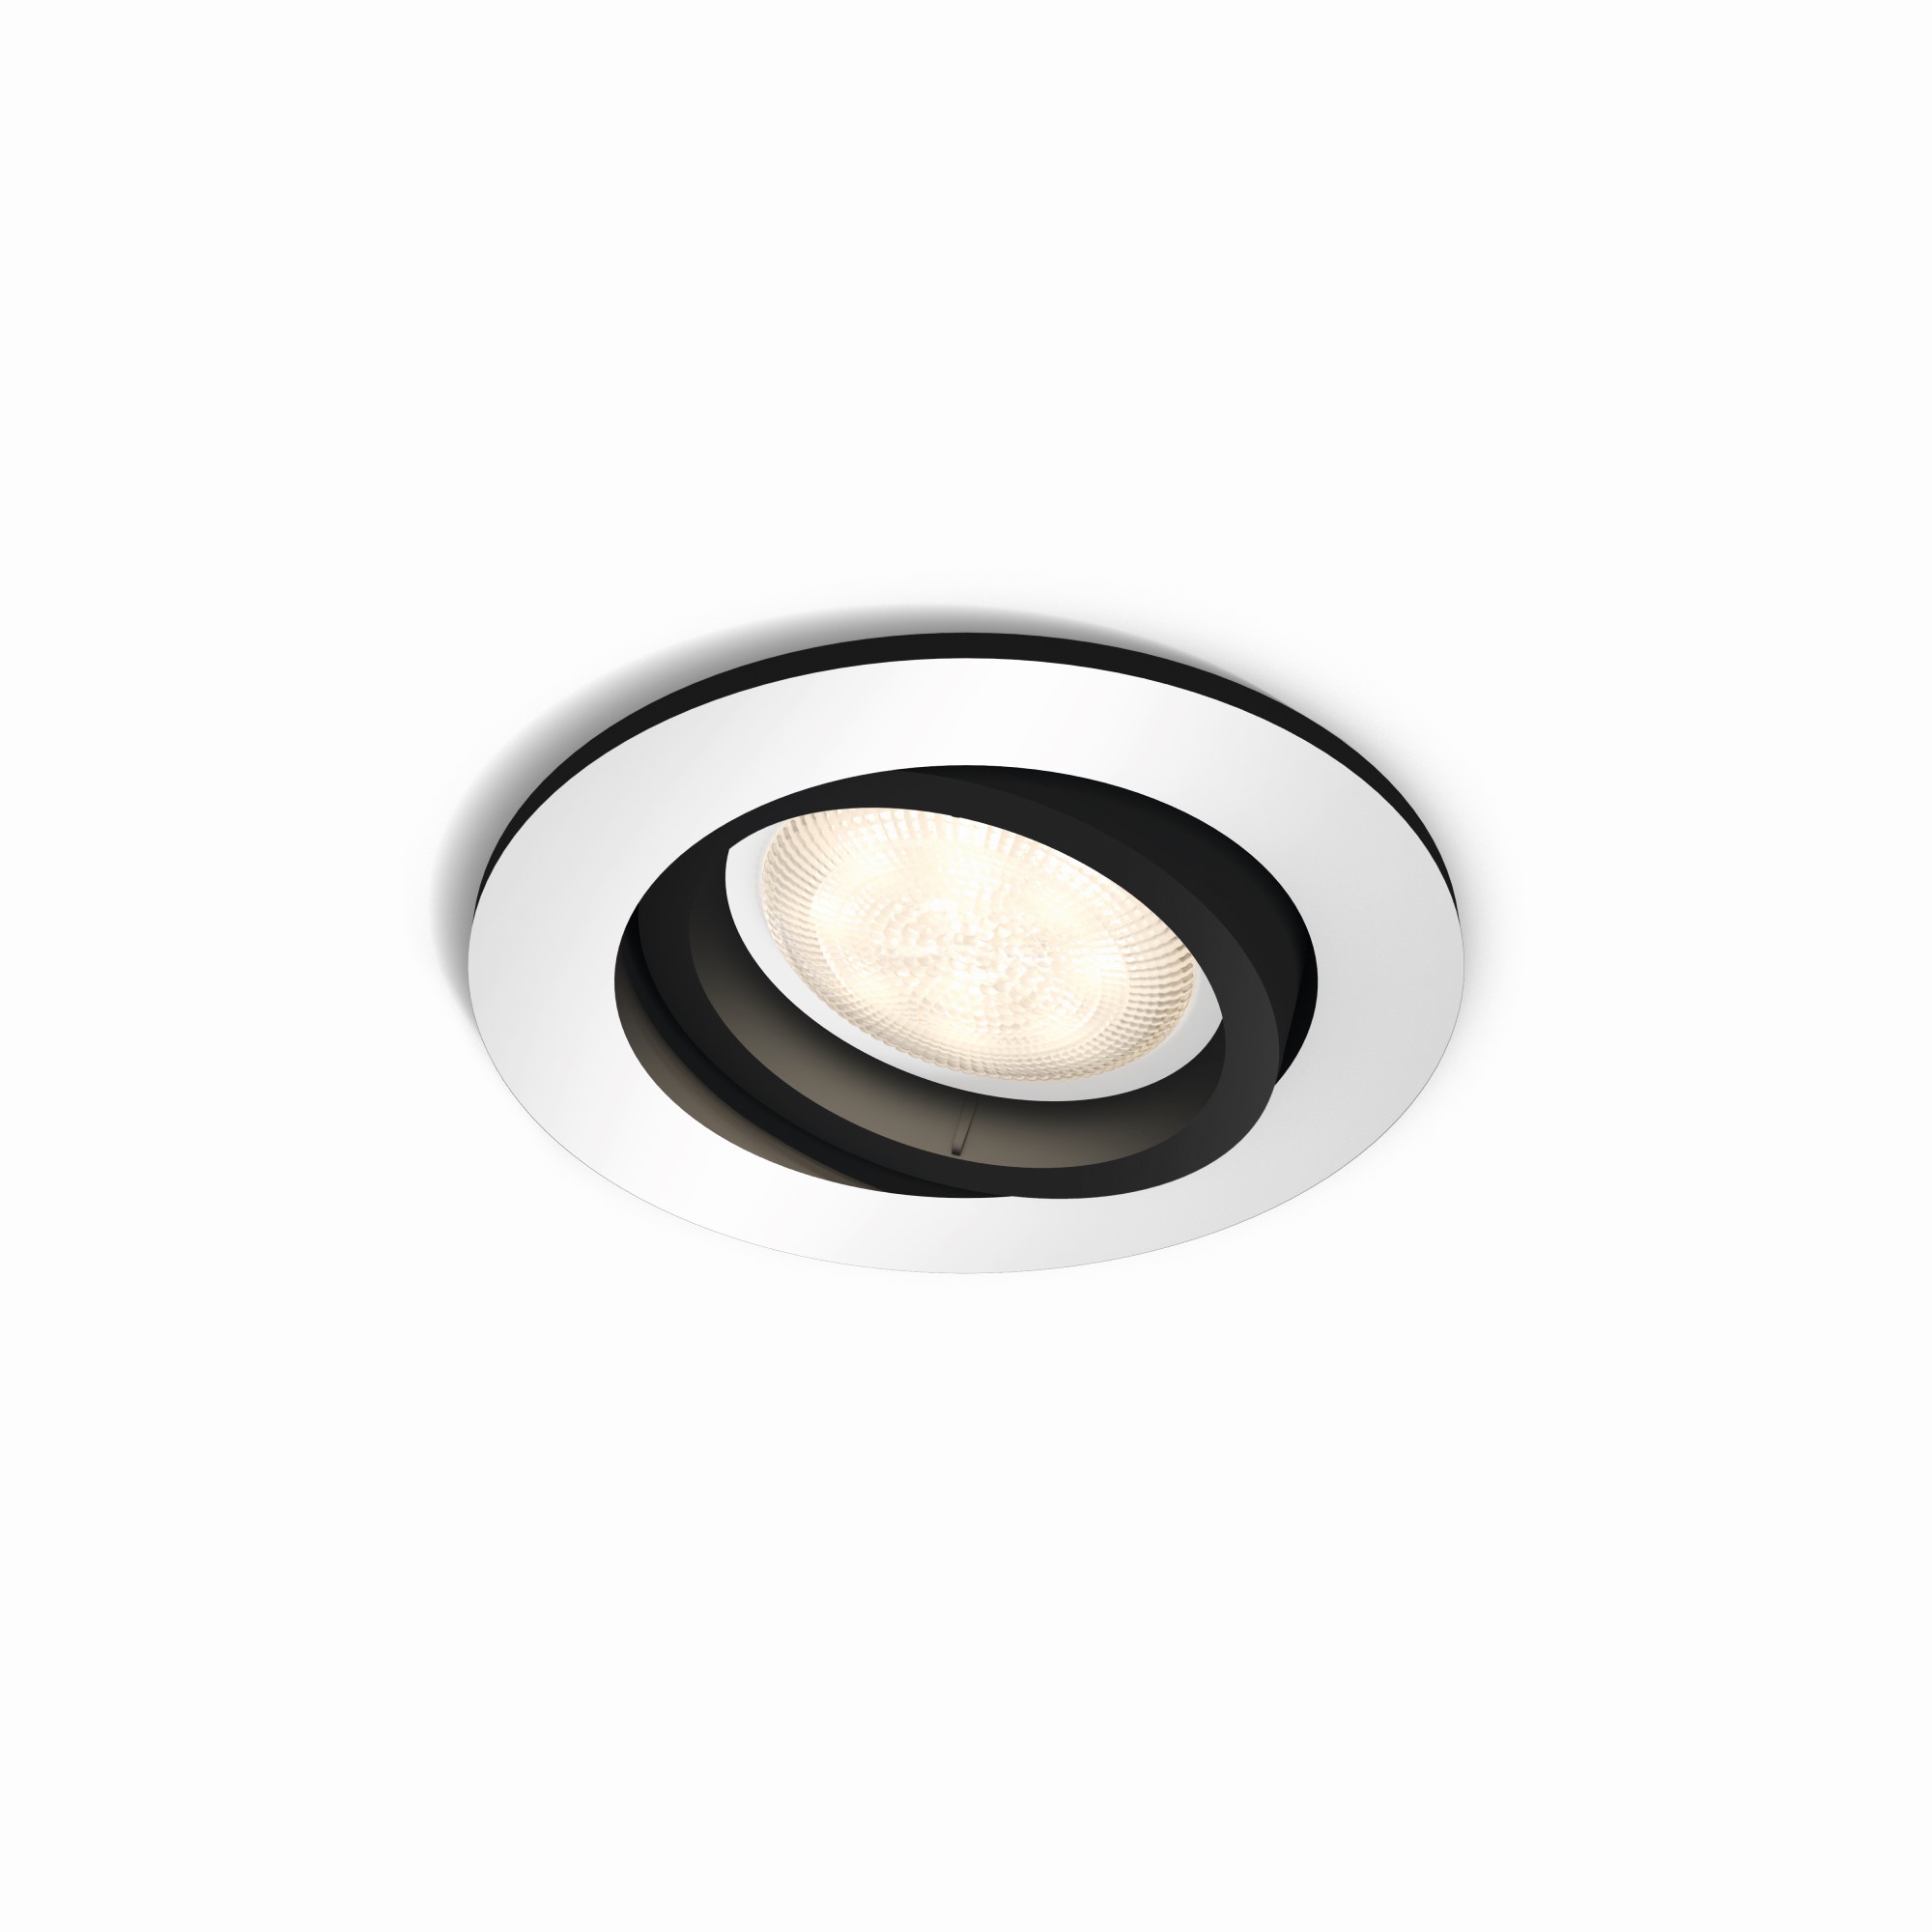 Philips Hue White Ambiance Milliskin LED Downlight round, silver, 250lm, with Dimmer Switch